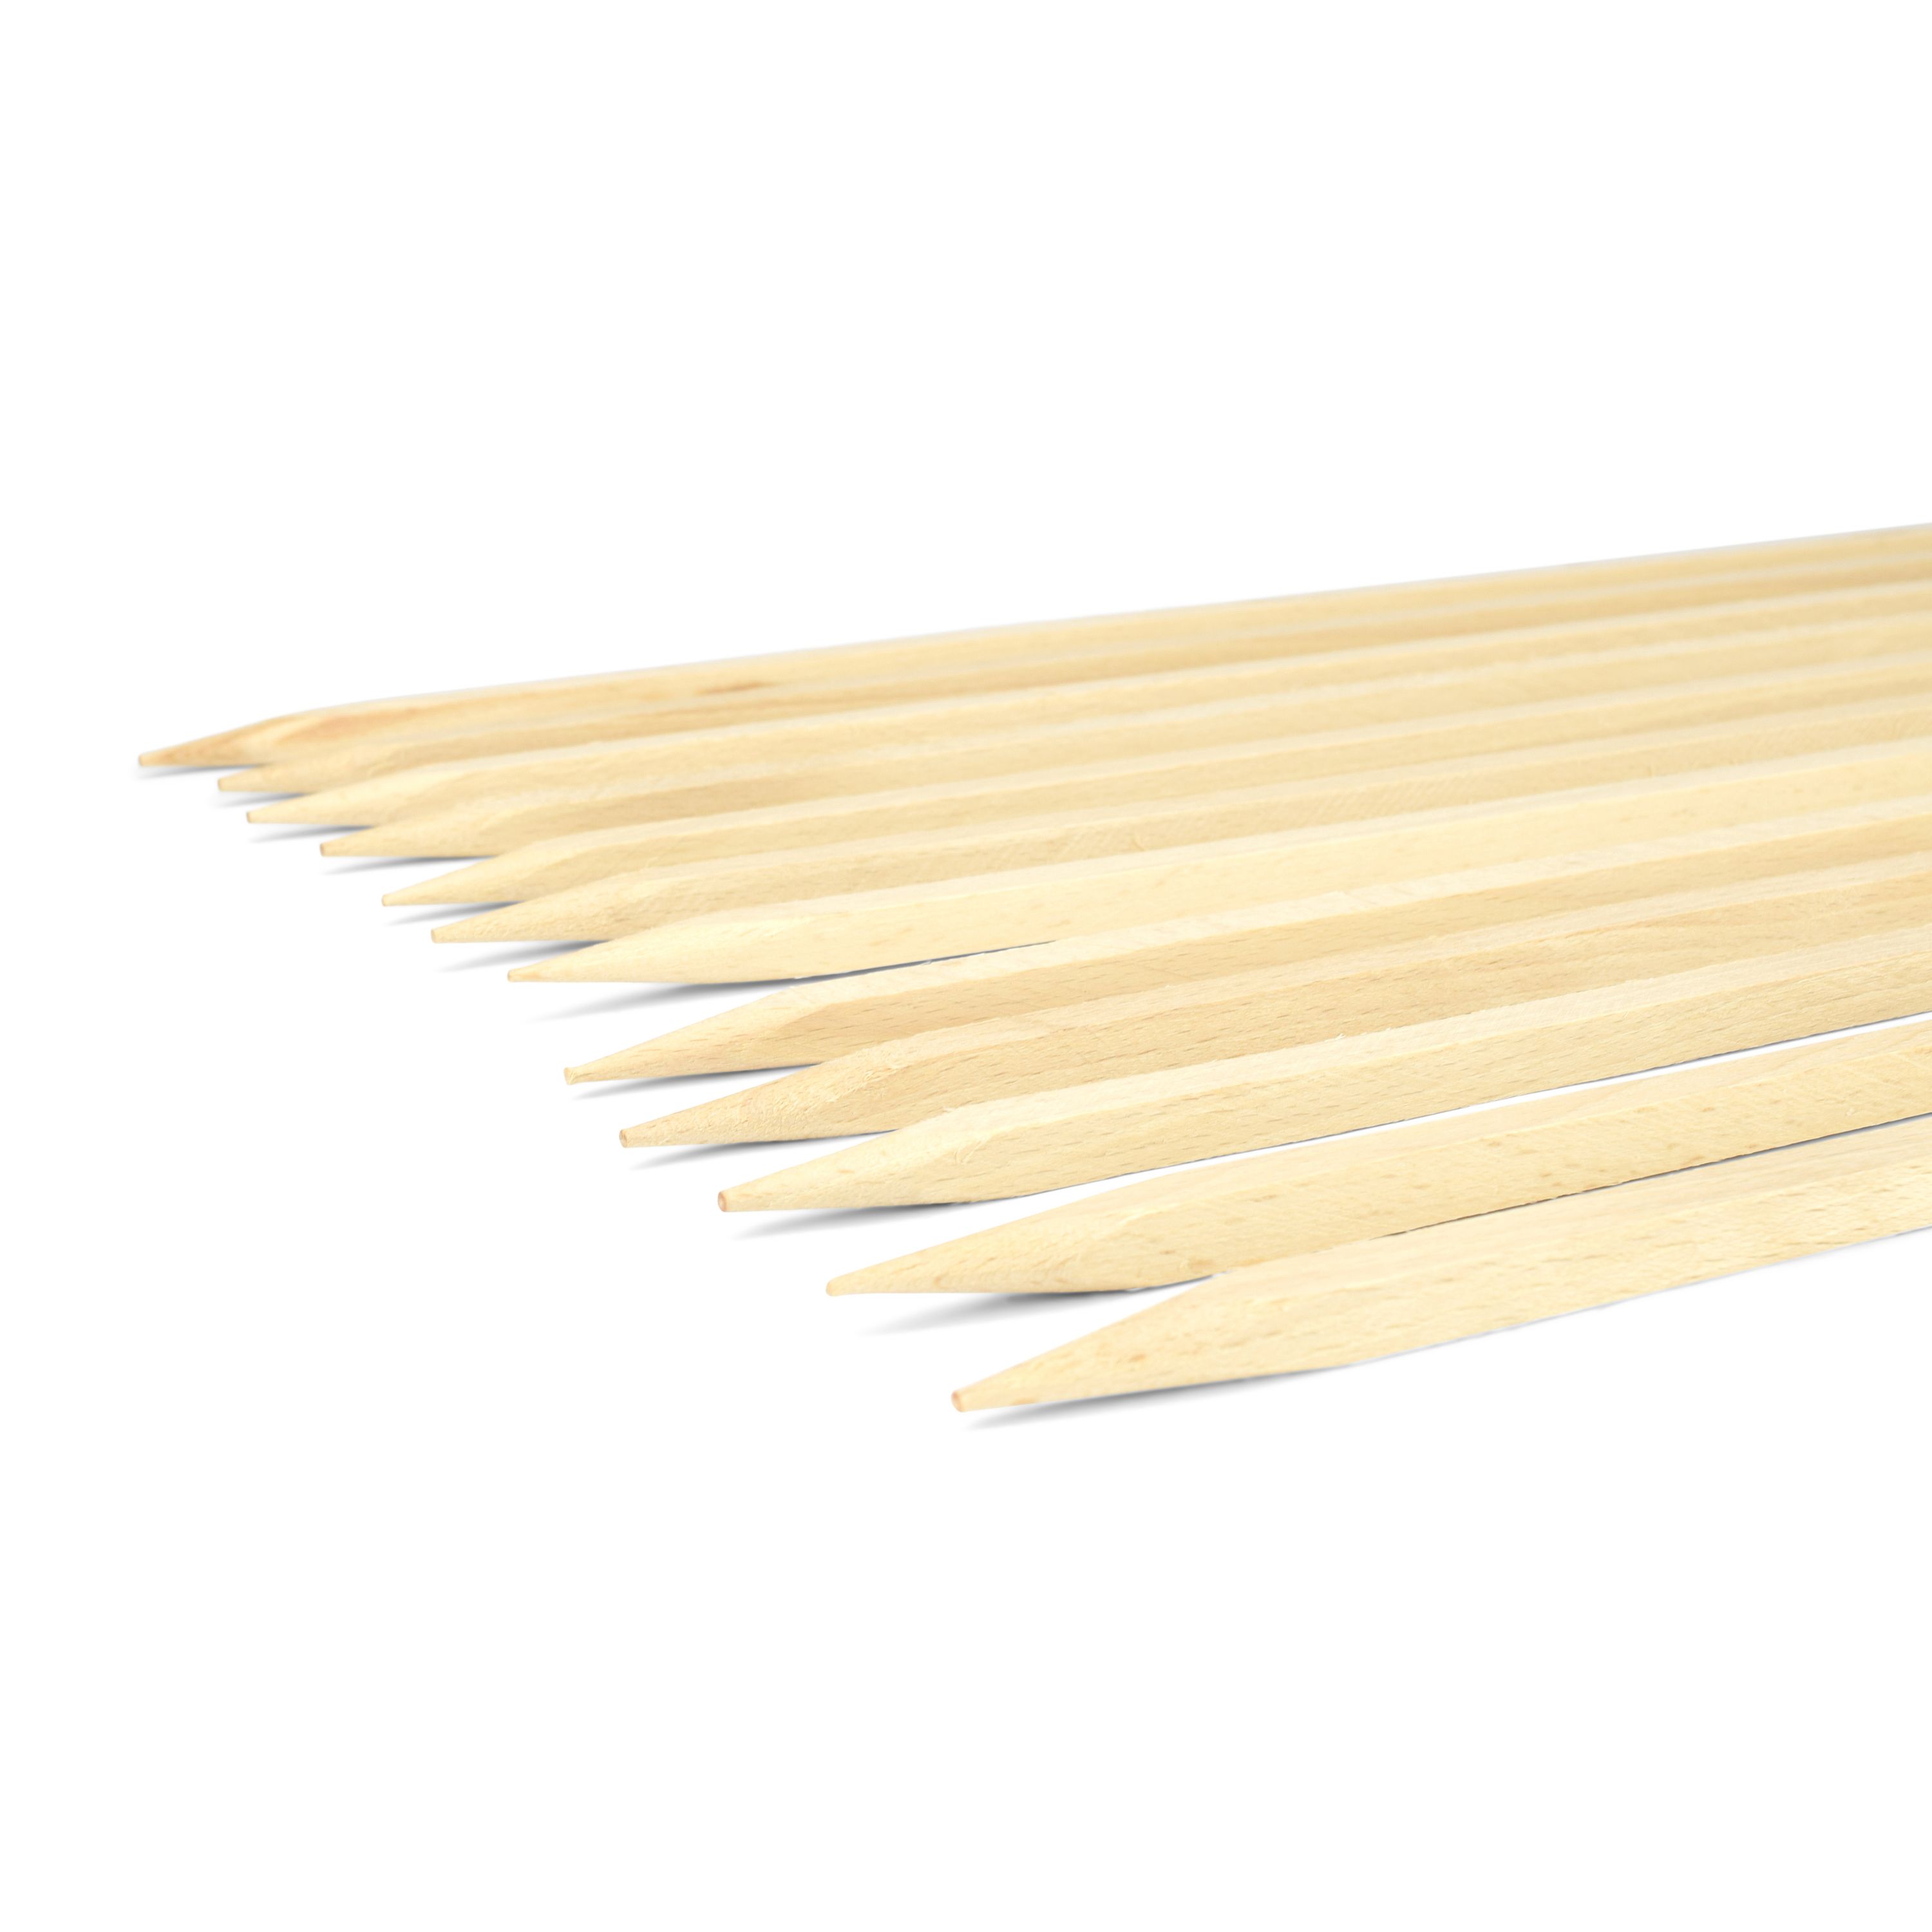 12 piece replacement skewers wood for the asado holder